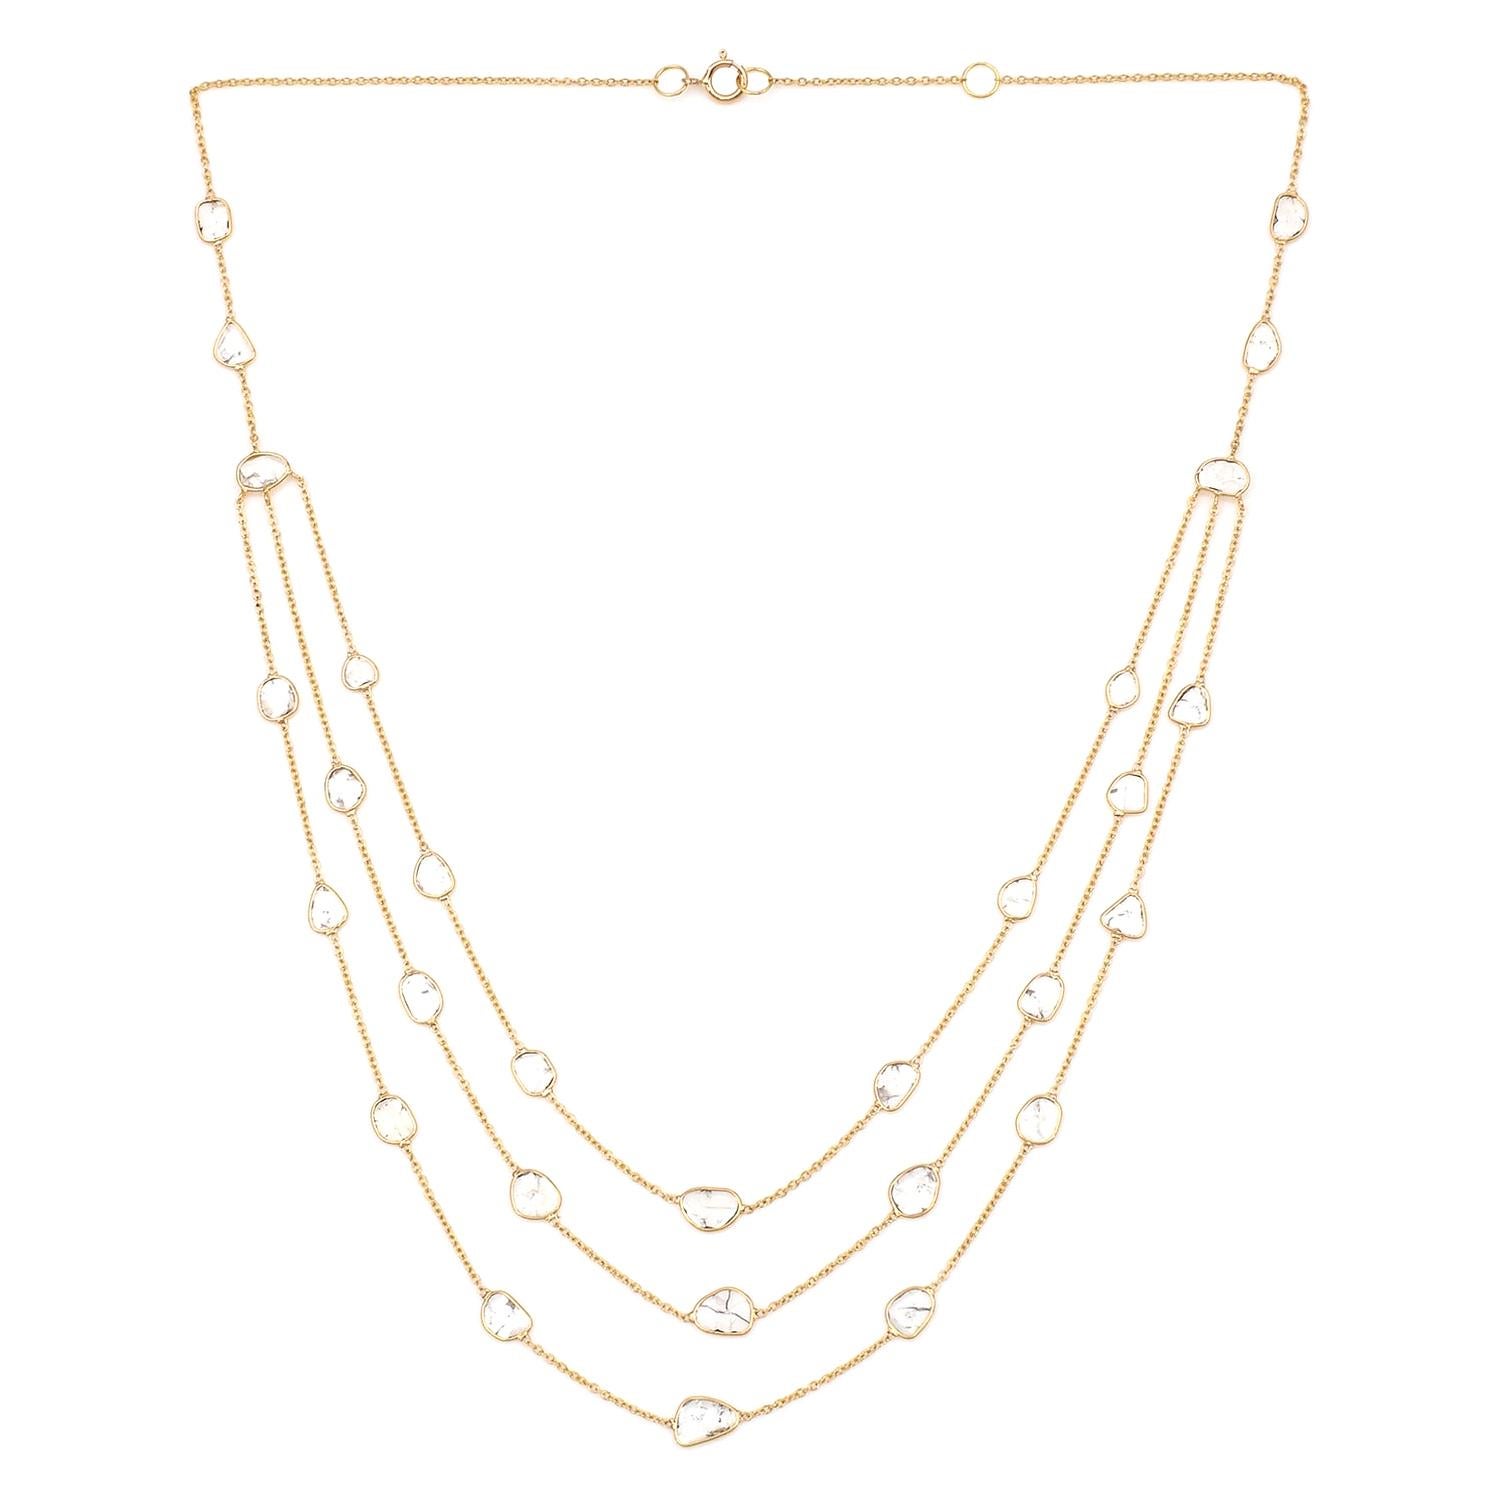 Triple Layer Diamond Slices Necklace, 18k Yellow Gold